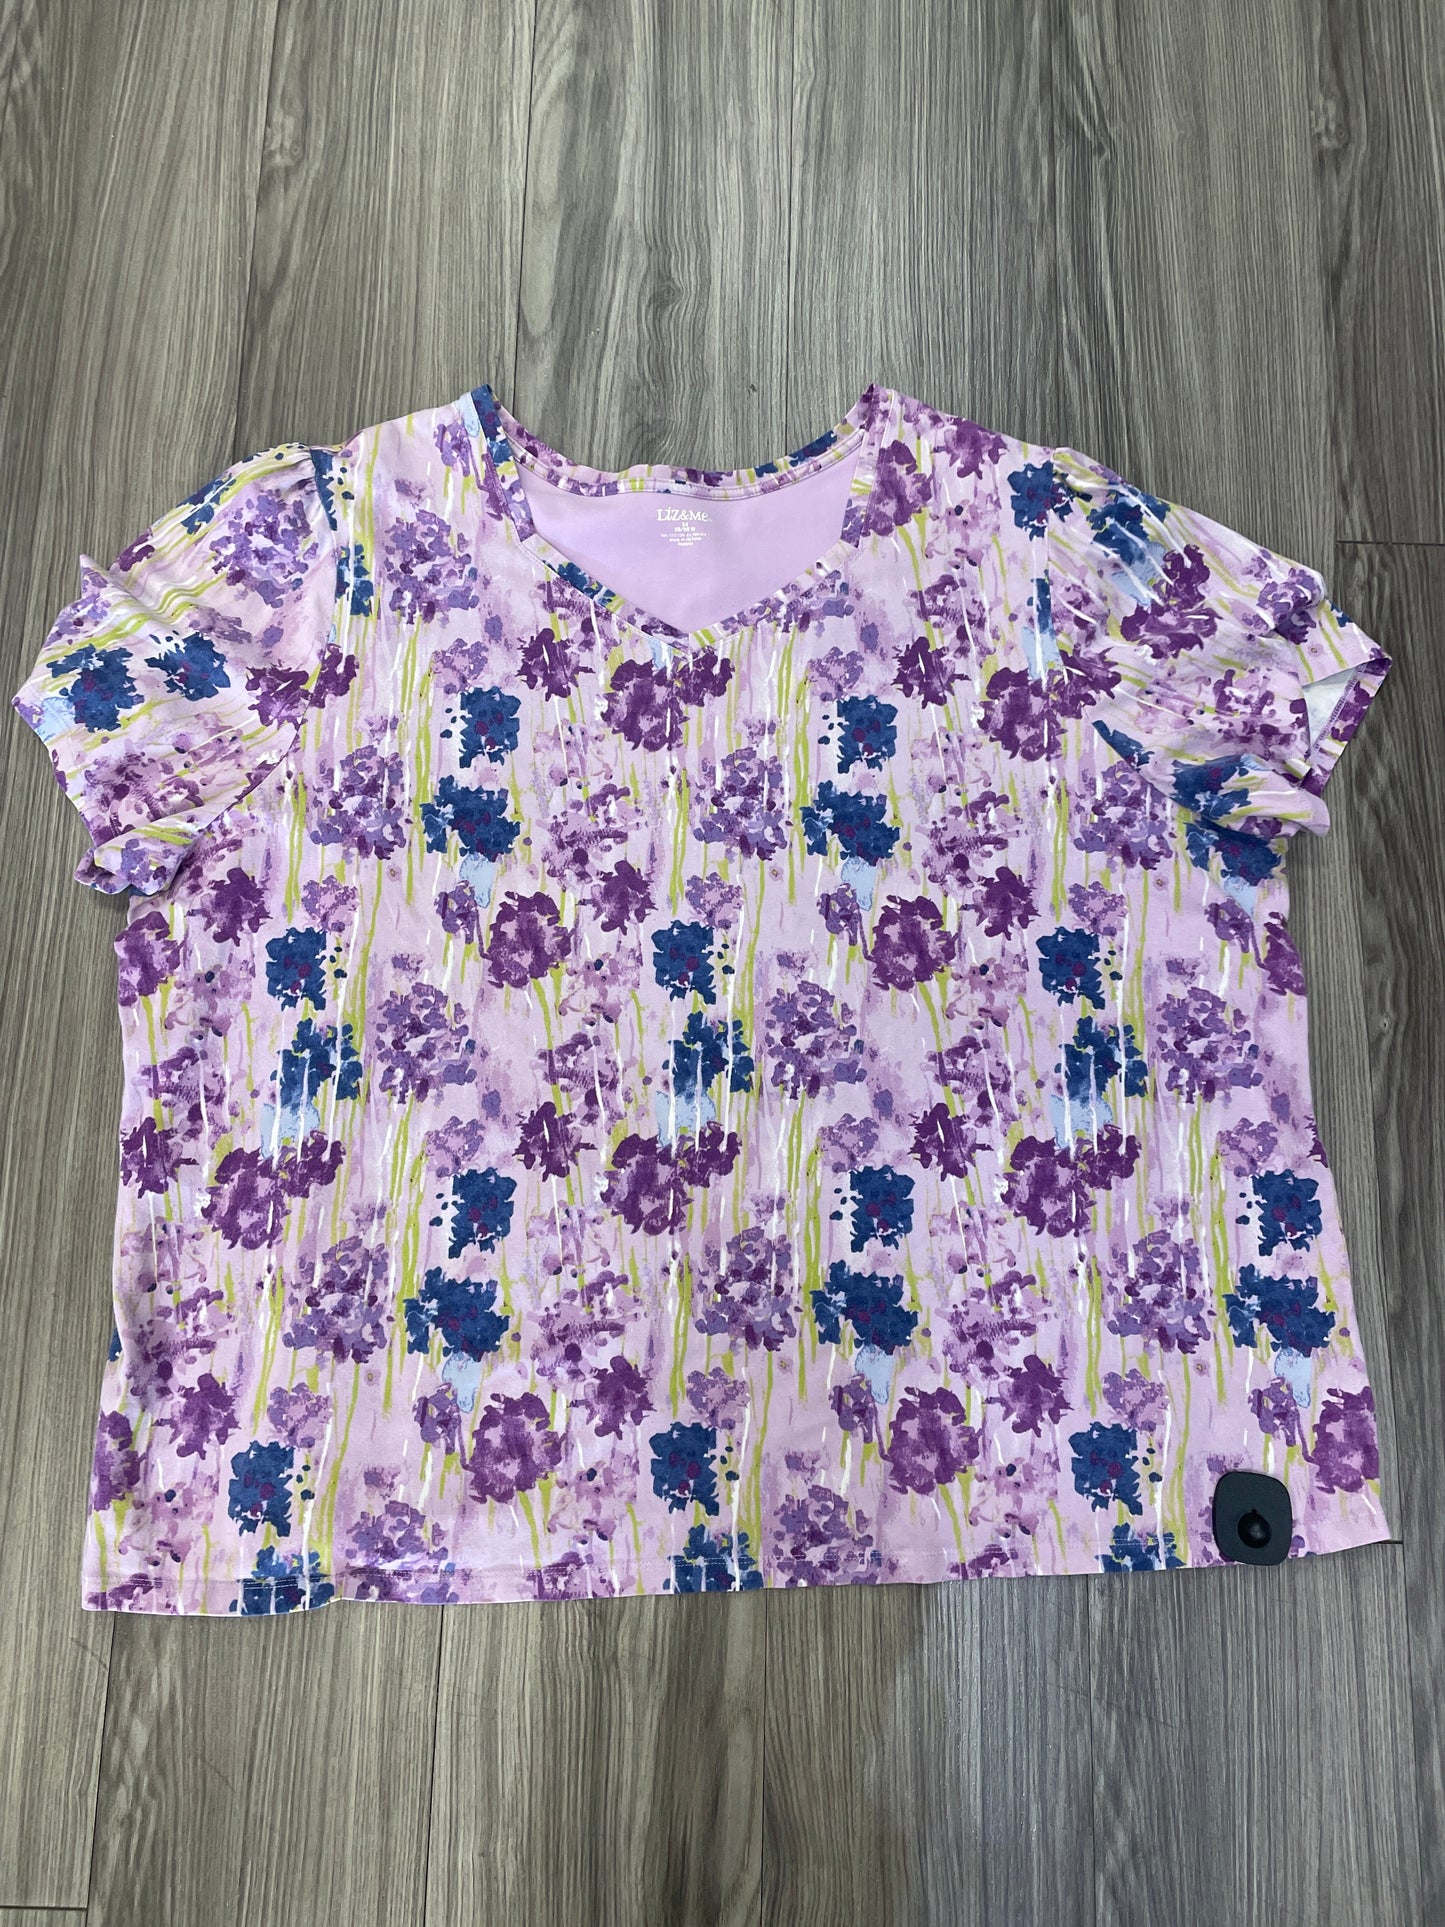 Multi-colored Top Short Sleeve Liz And Me, Size 3x